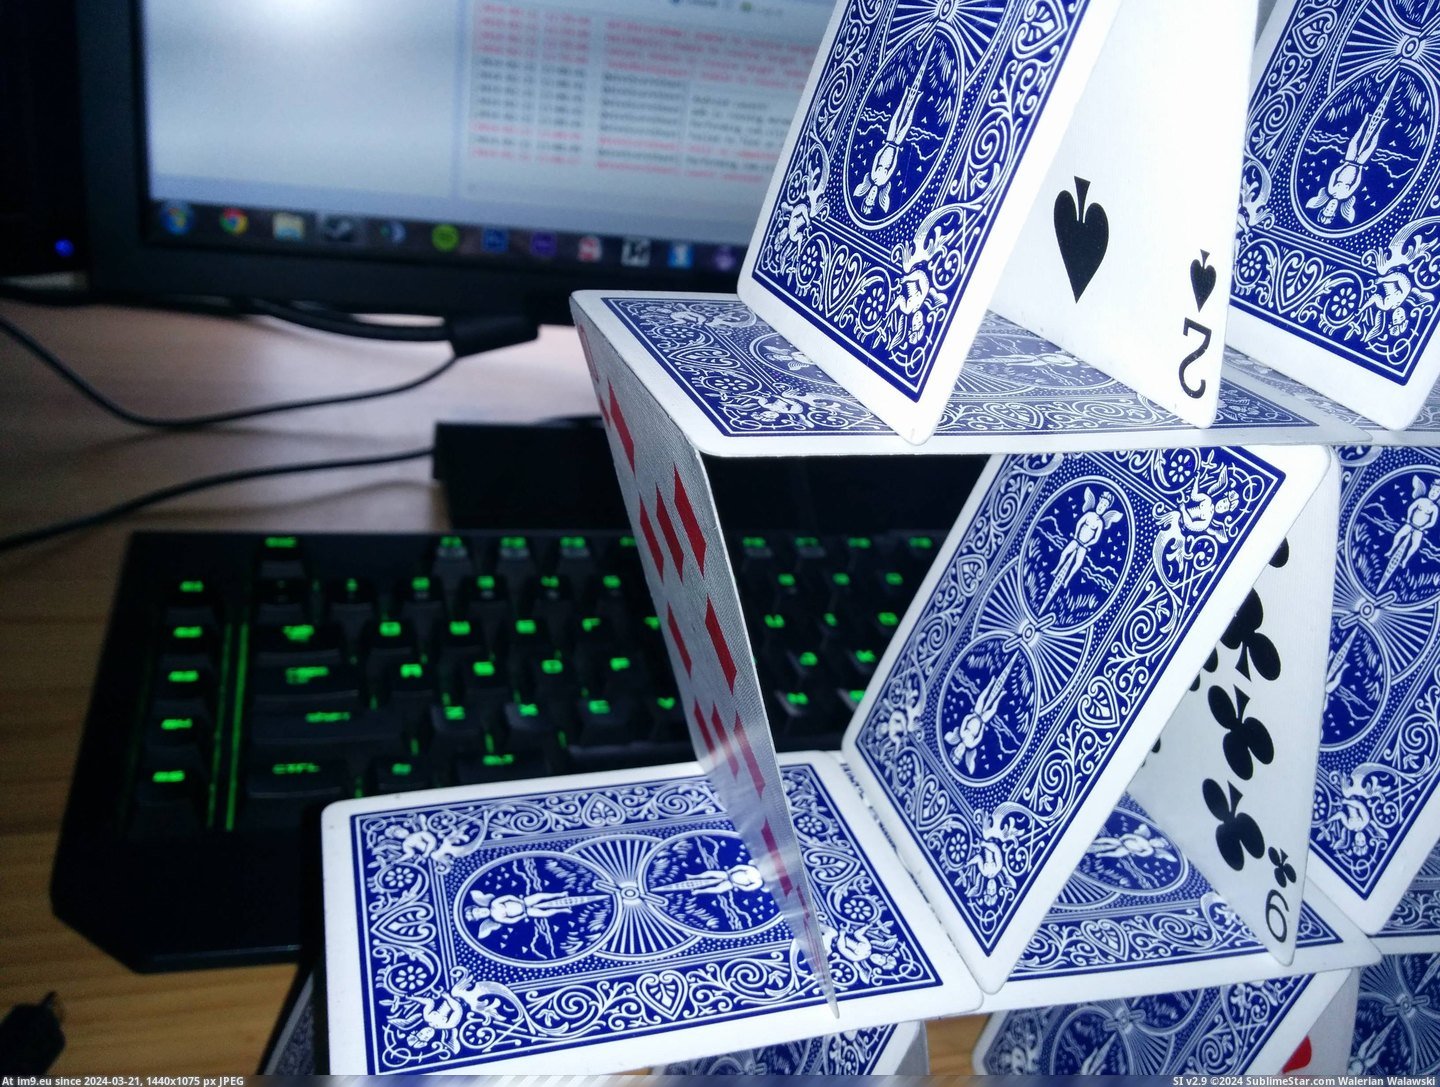 #House #Cards #Collapsed #Ended #Partially [Mildlyinteresting] My house of cards partially collapsed and somehow ended up like this. Pic. (Изображение из альбом My r/MILDLYINTERESTING favs))